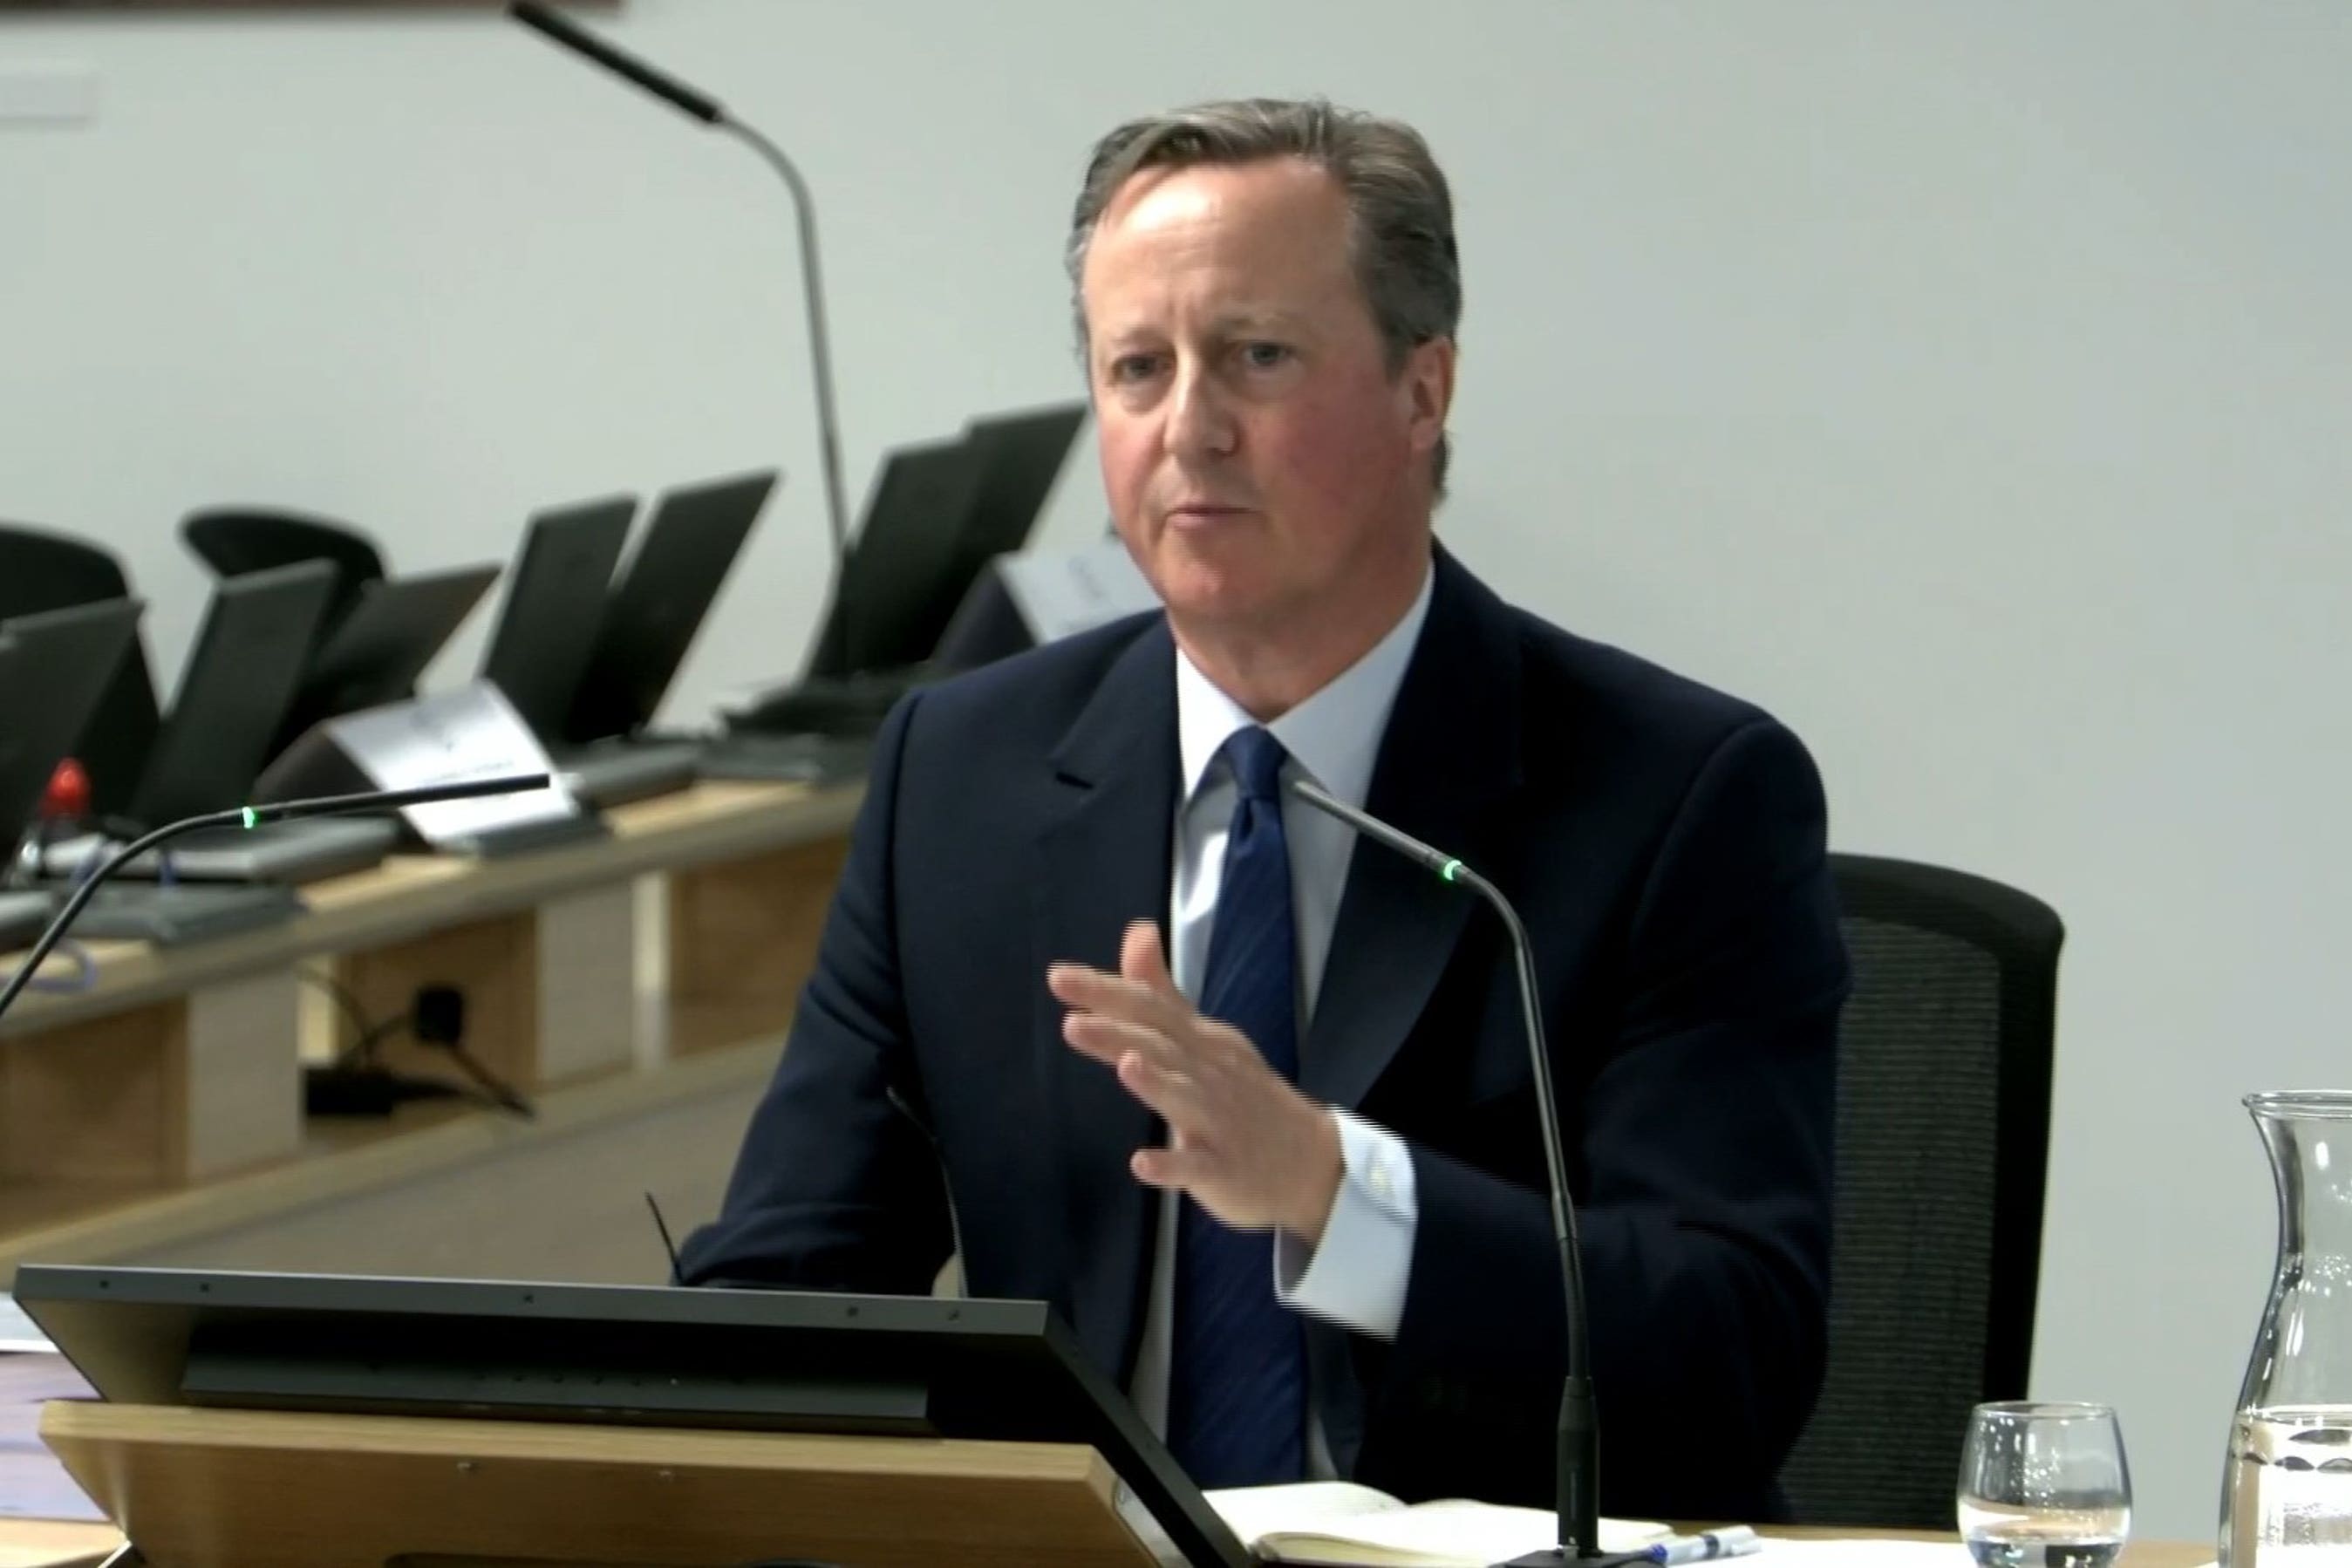 Former prime minister David Cameron giving evidence to the UK Covid-19 Inquiry in Paddington, west London, on Monday